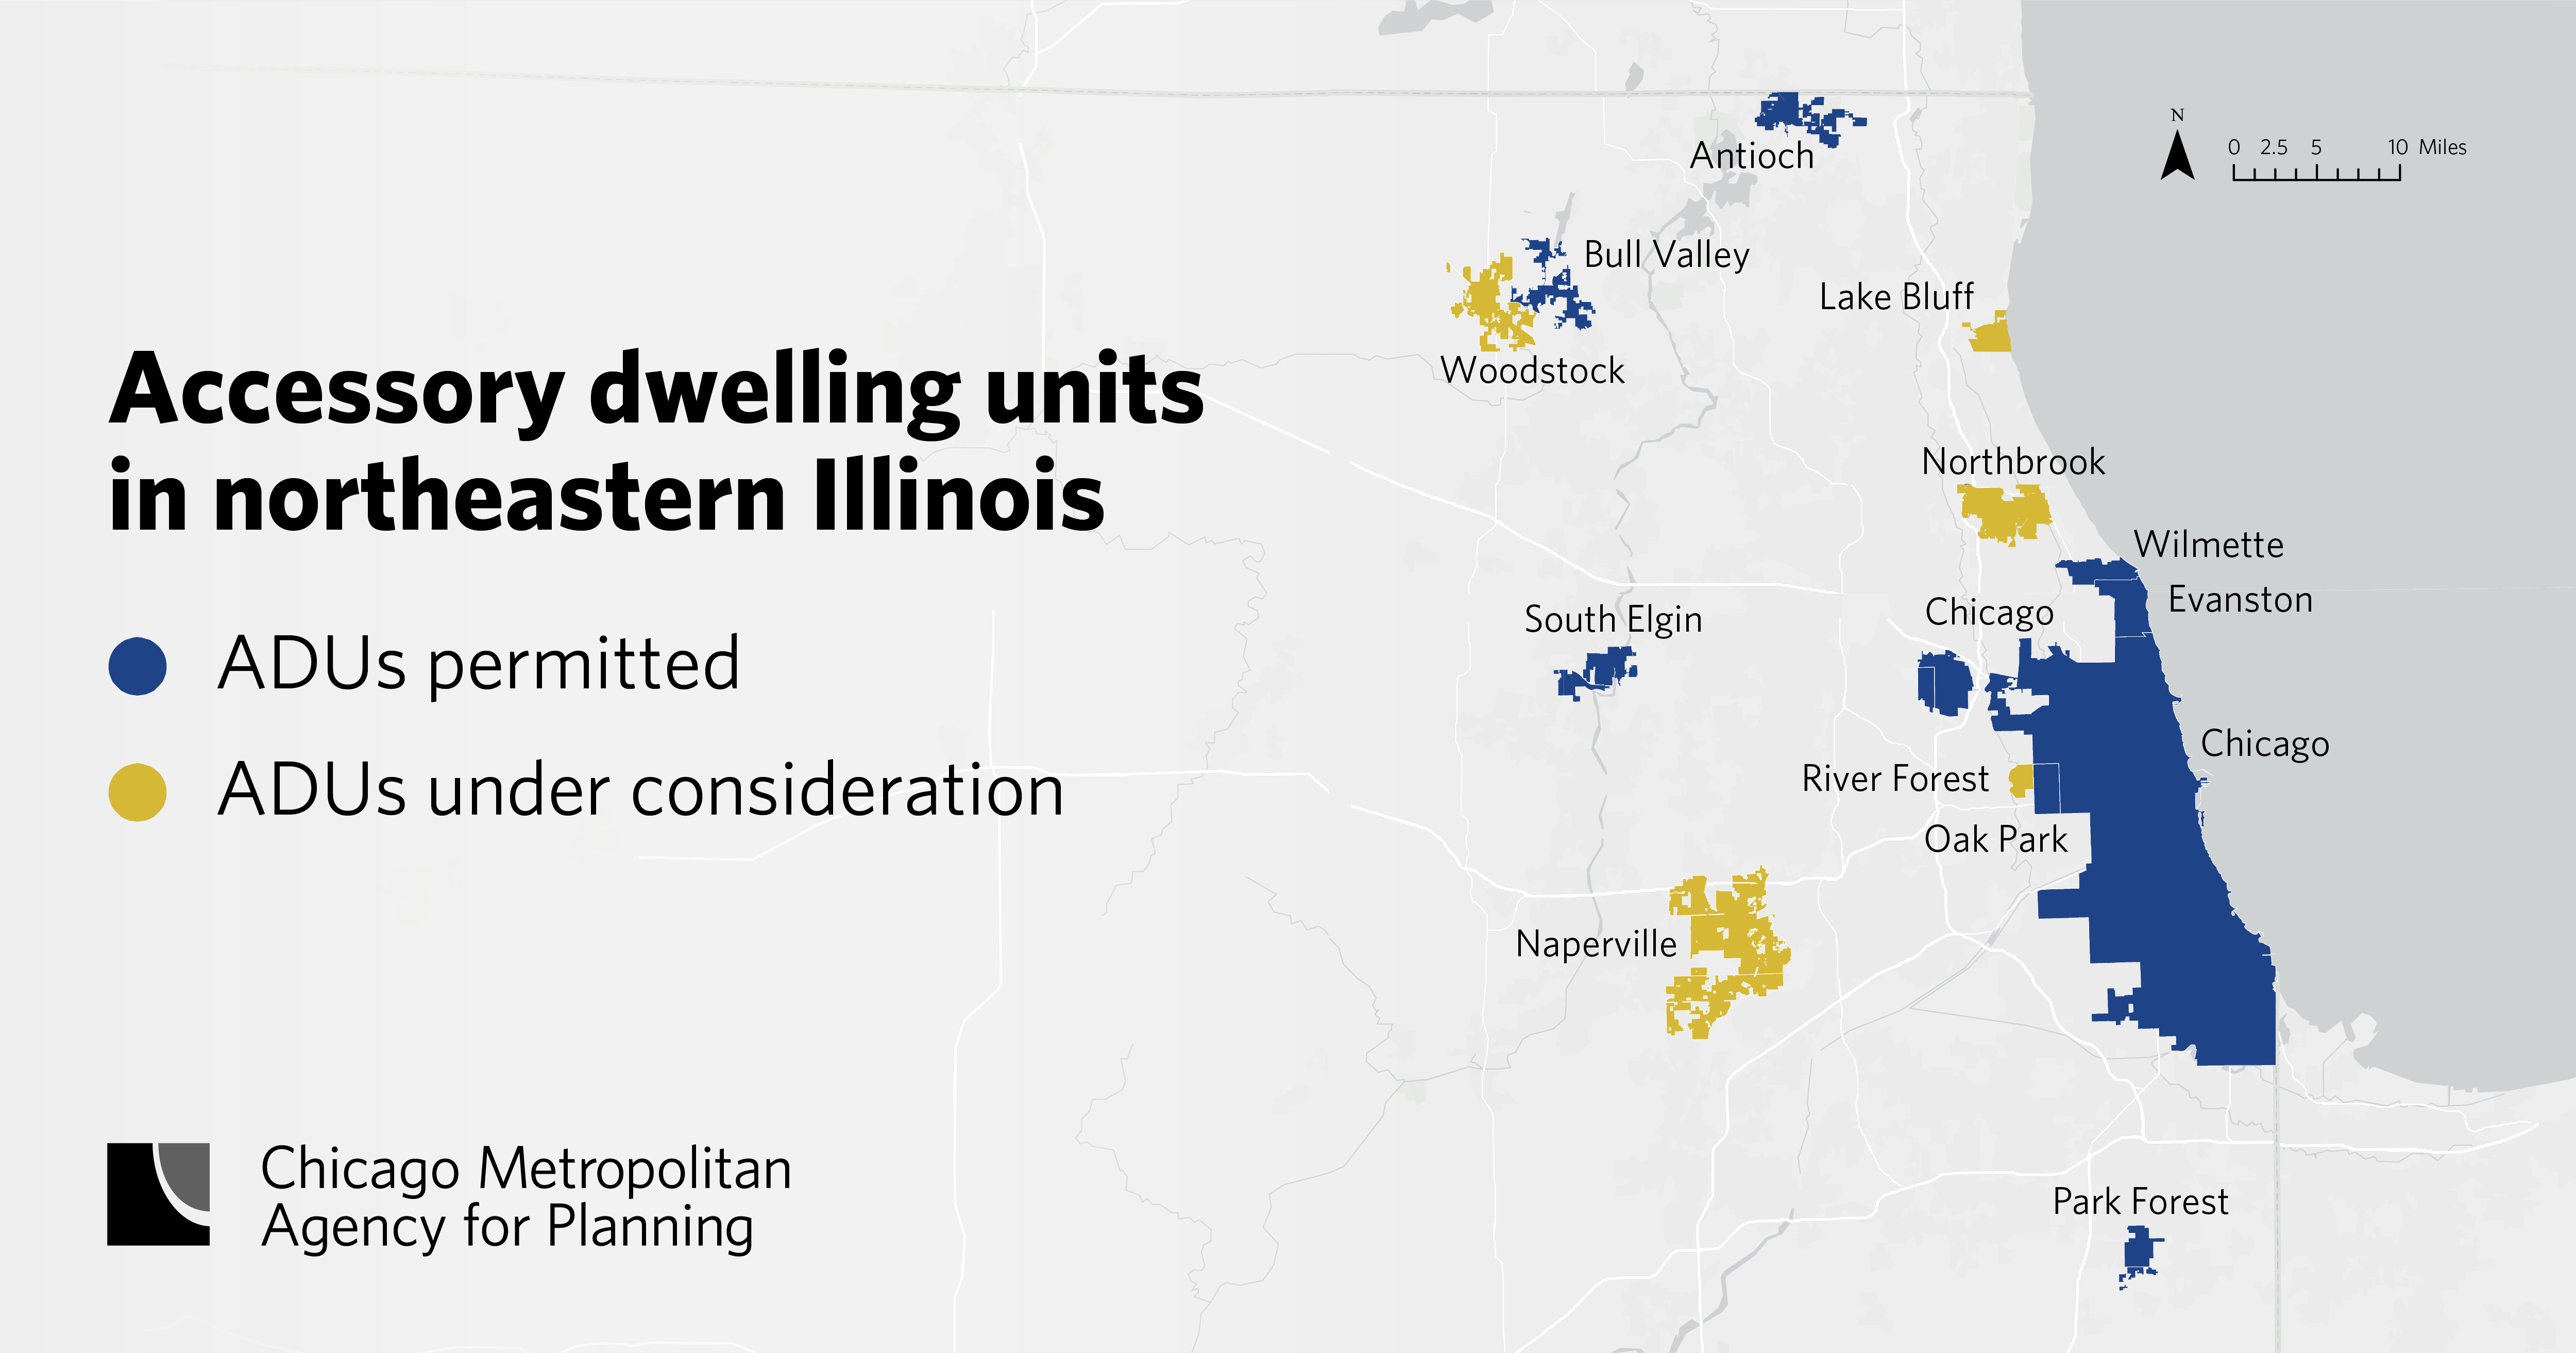 Where accessory dwelling units are allowed in northeastern Illinois